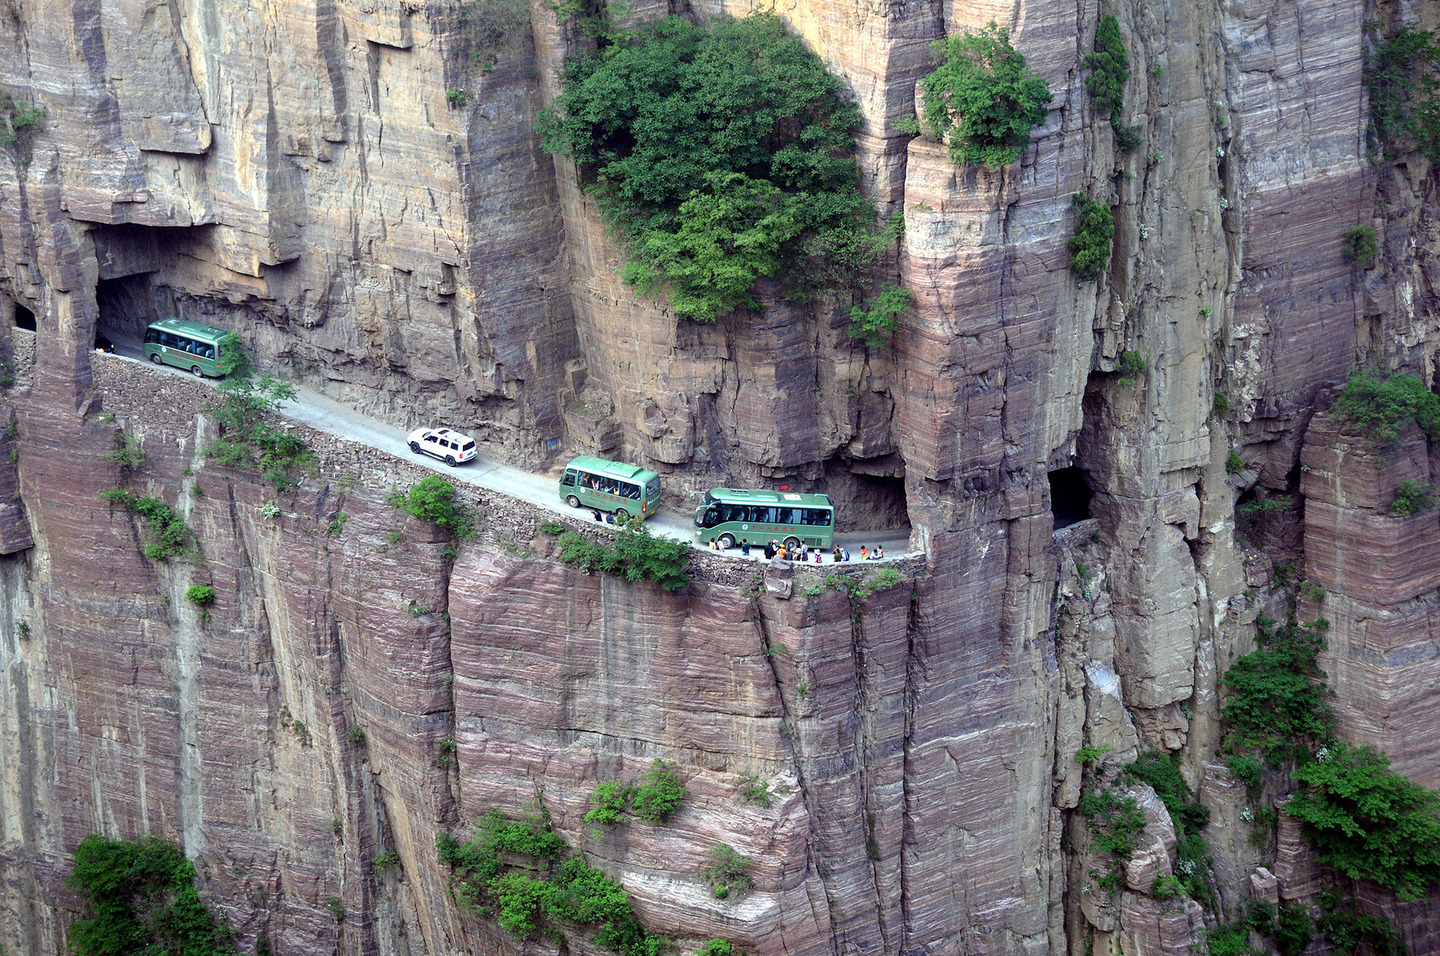 The Chinese Guoliang Tunnel is amazingly carved along the side of and through a mountain in China.